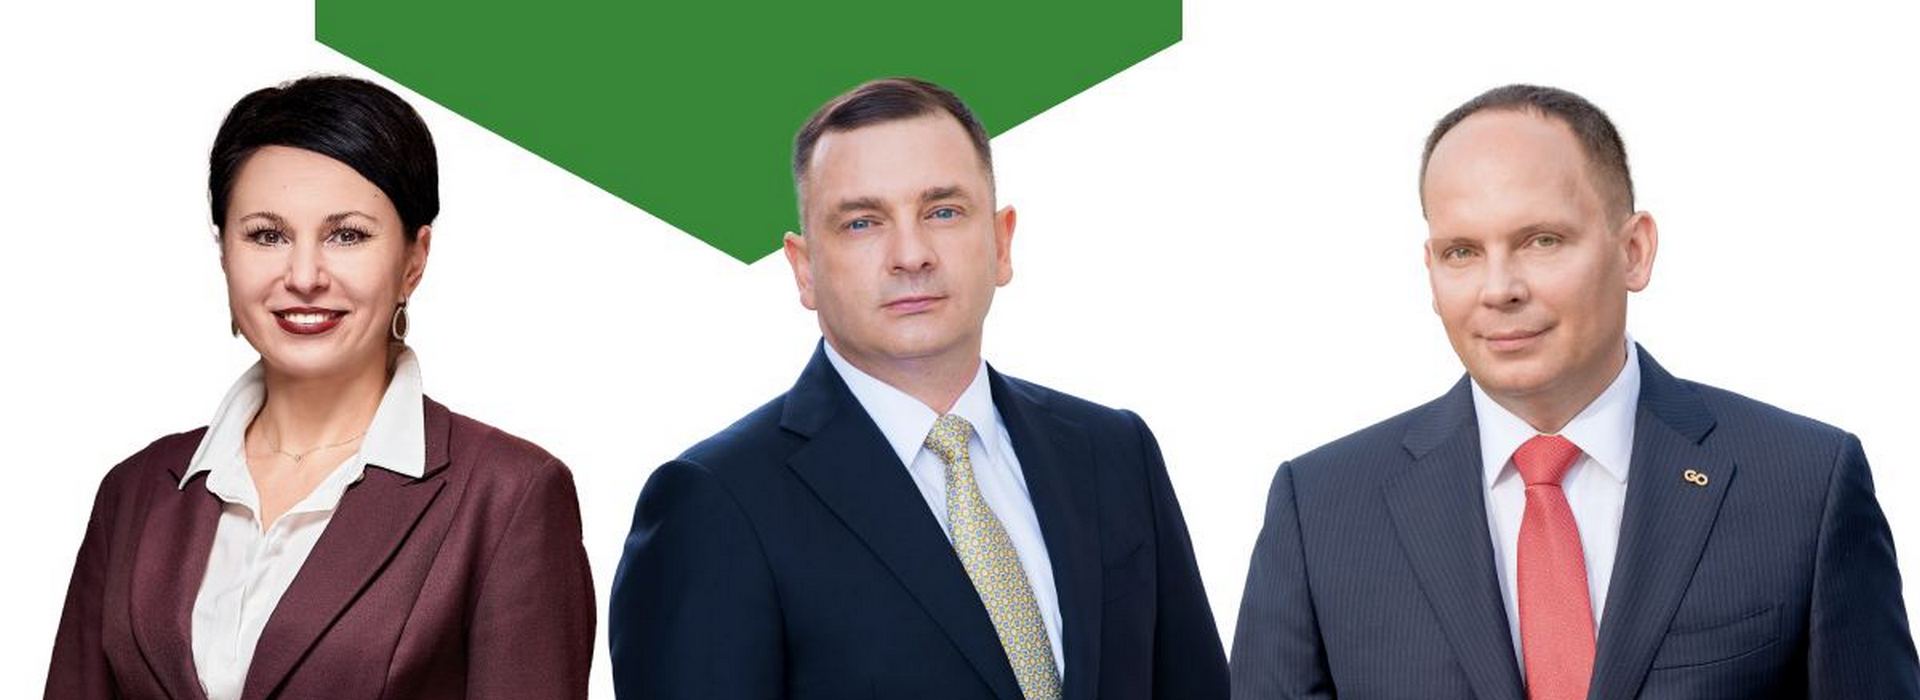 GOLAW Attorneys Have Become the Only Attorneys from Ukraine Who Received the Highest Recognition – Global Leaders According to the Independent International Legal Sdvisory Who’s Who Legal 2022